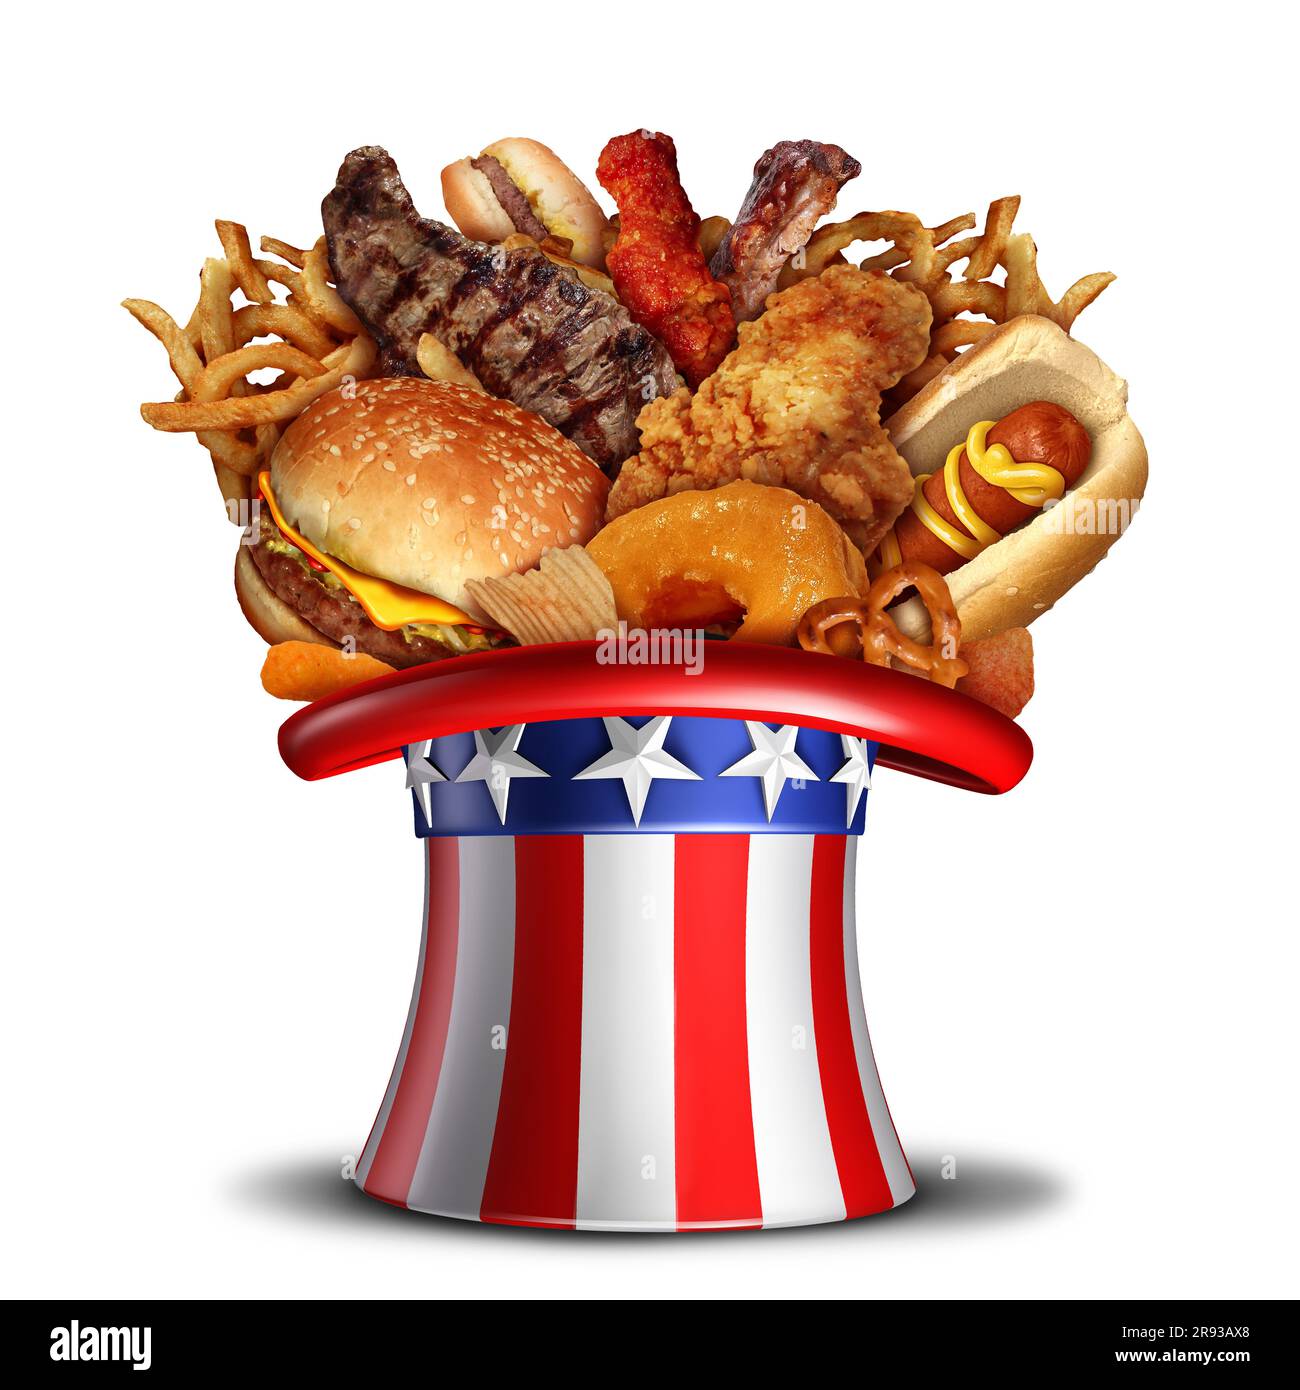 Fourth of july food and Independence Day summer cookout in the United States celebration with the American flag hat and US Holiday in the USA as a 3D Stock Photo